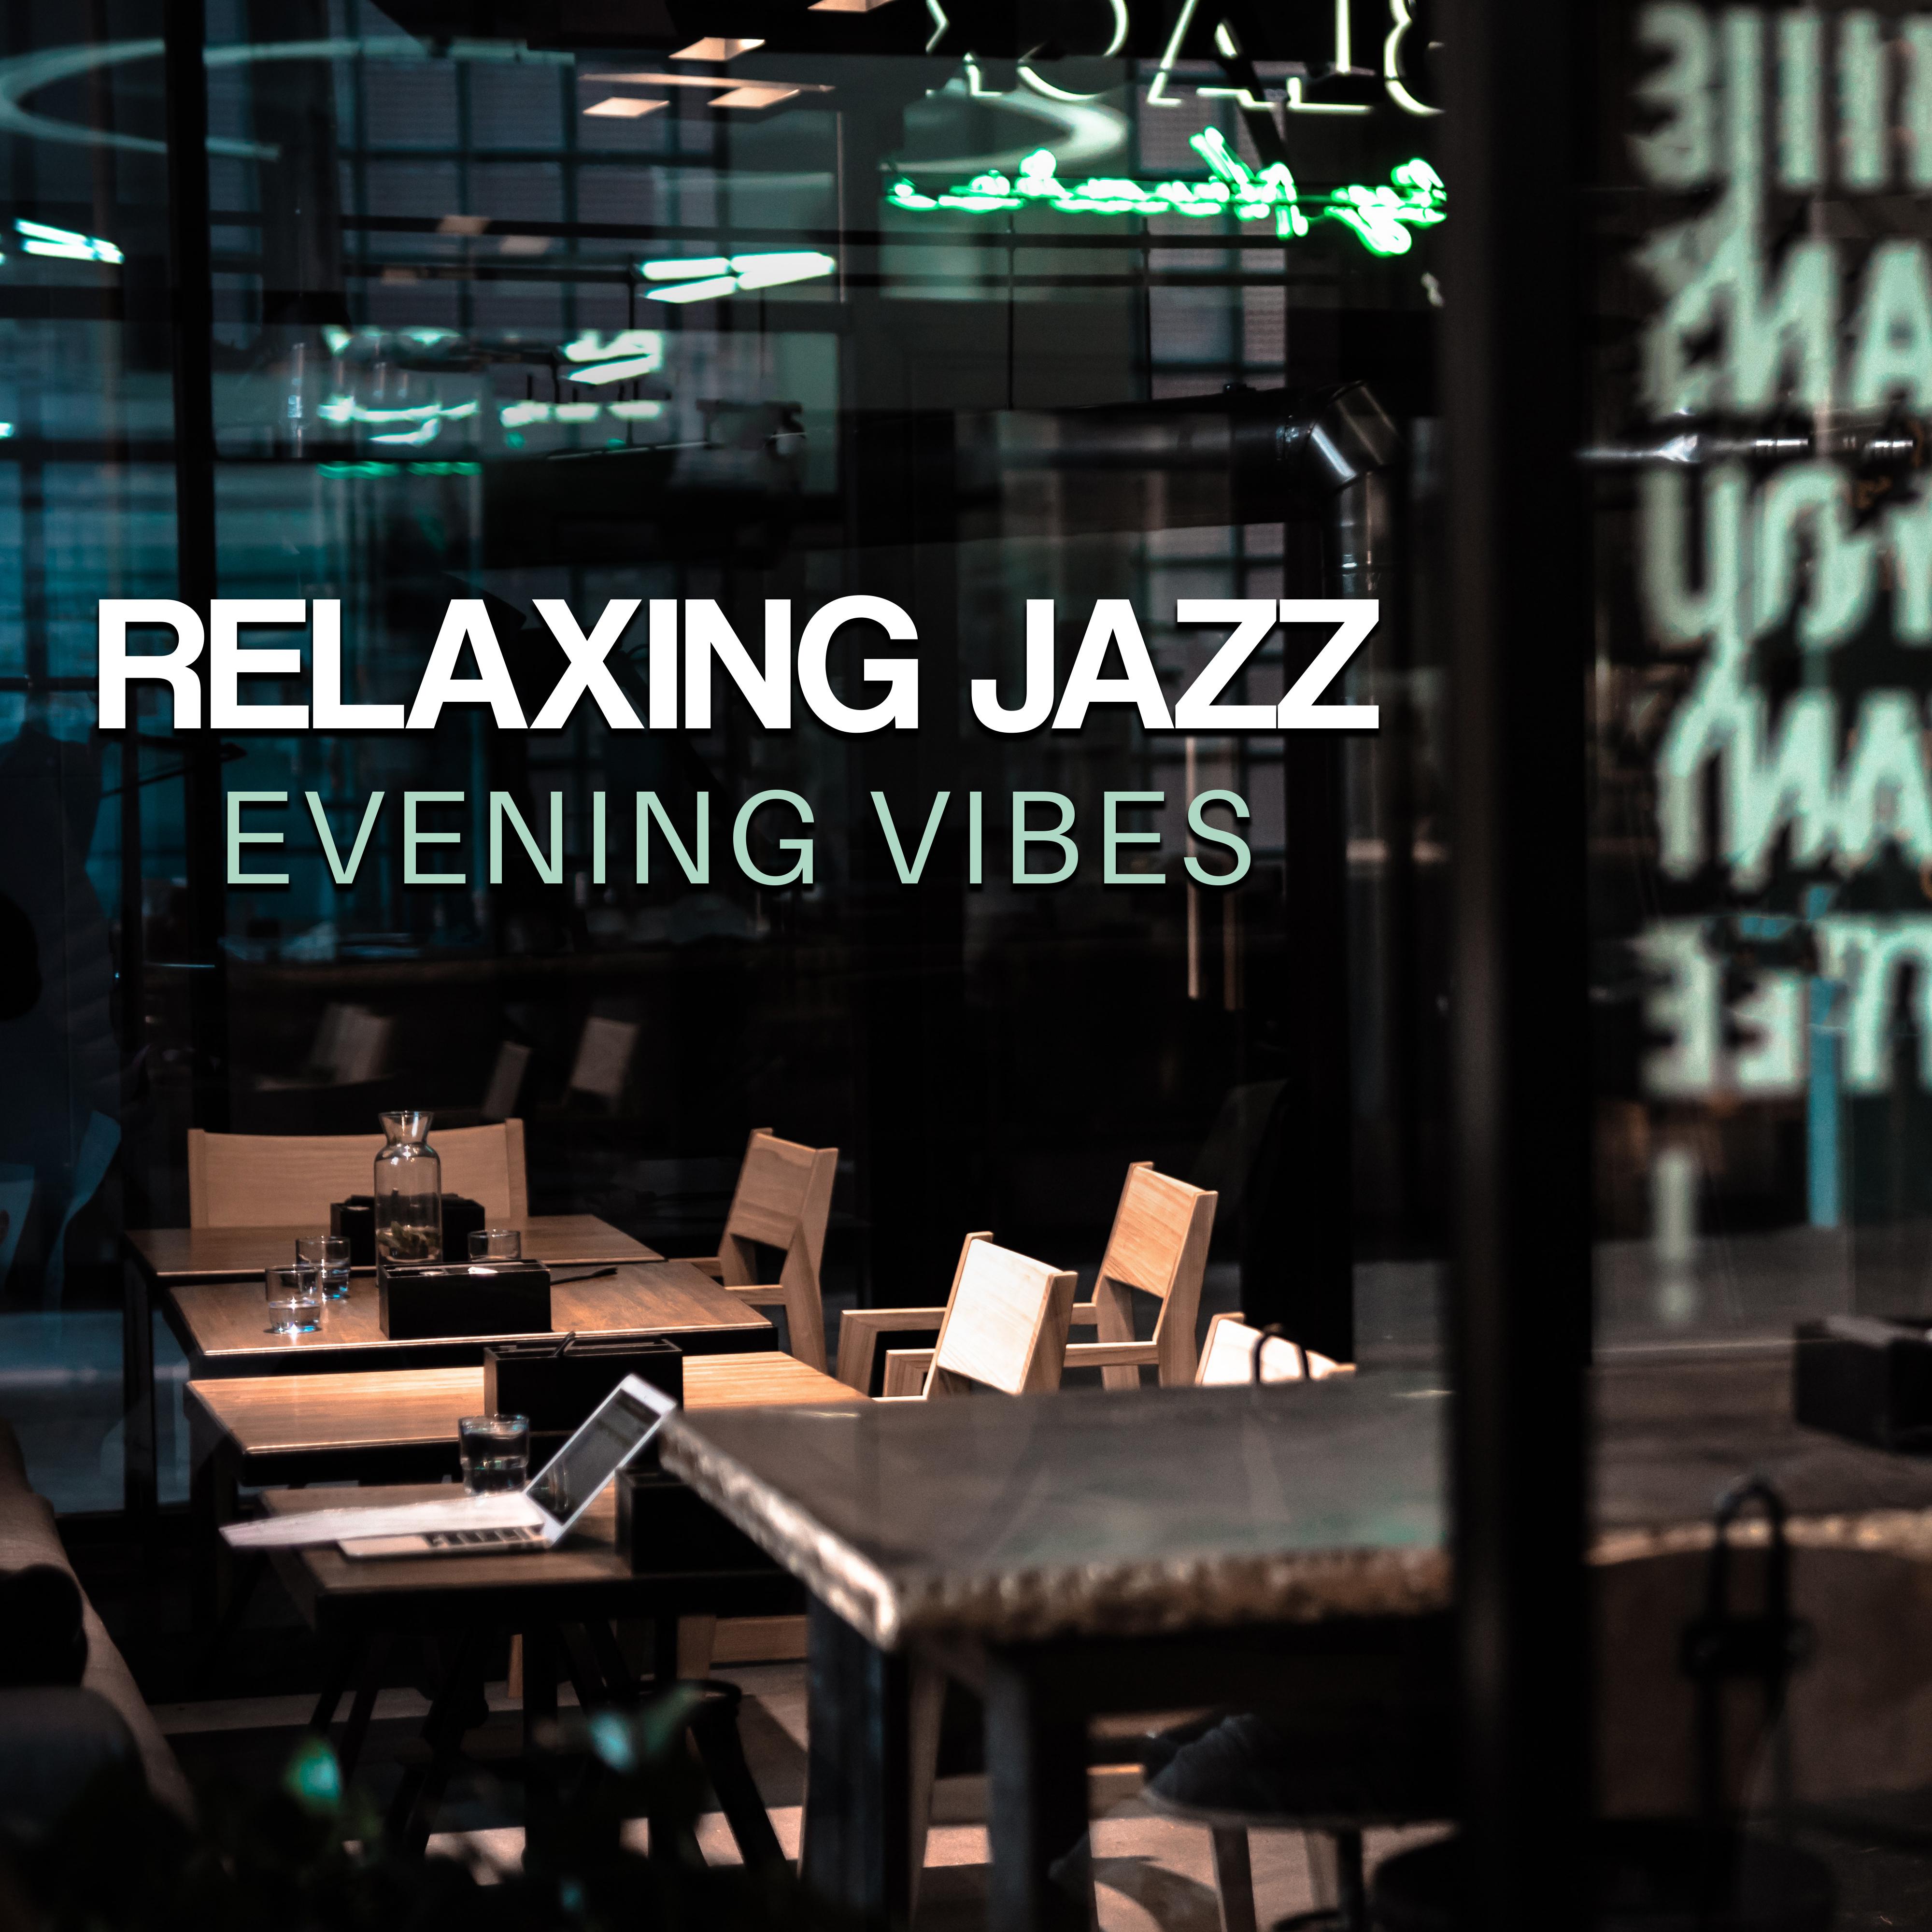 Relaxing Jazz Evening Vibes